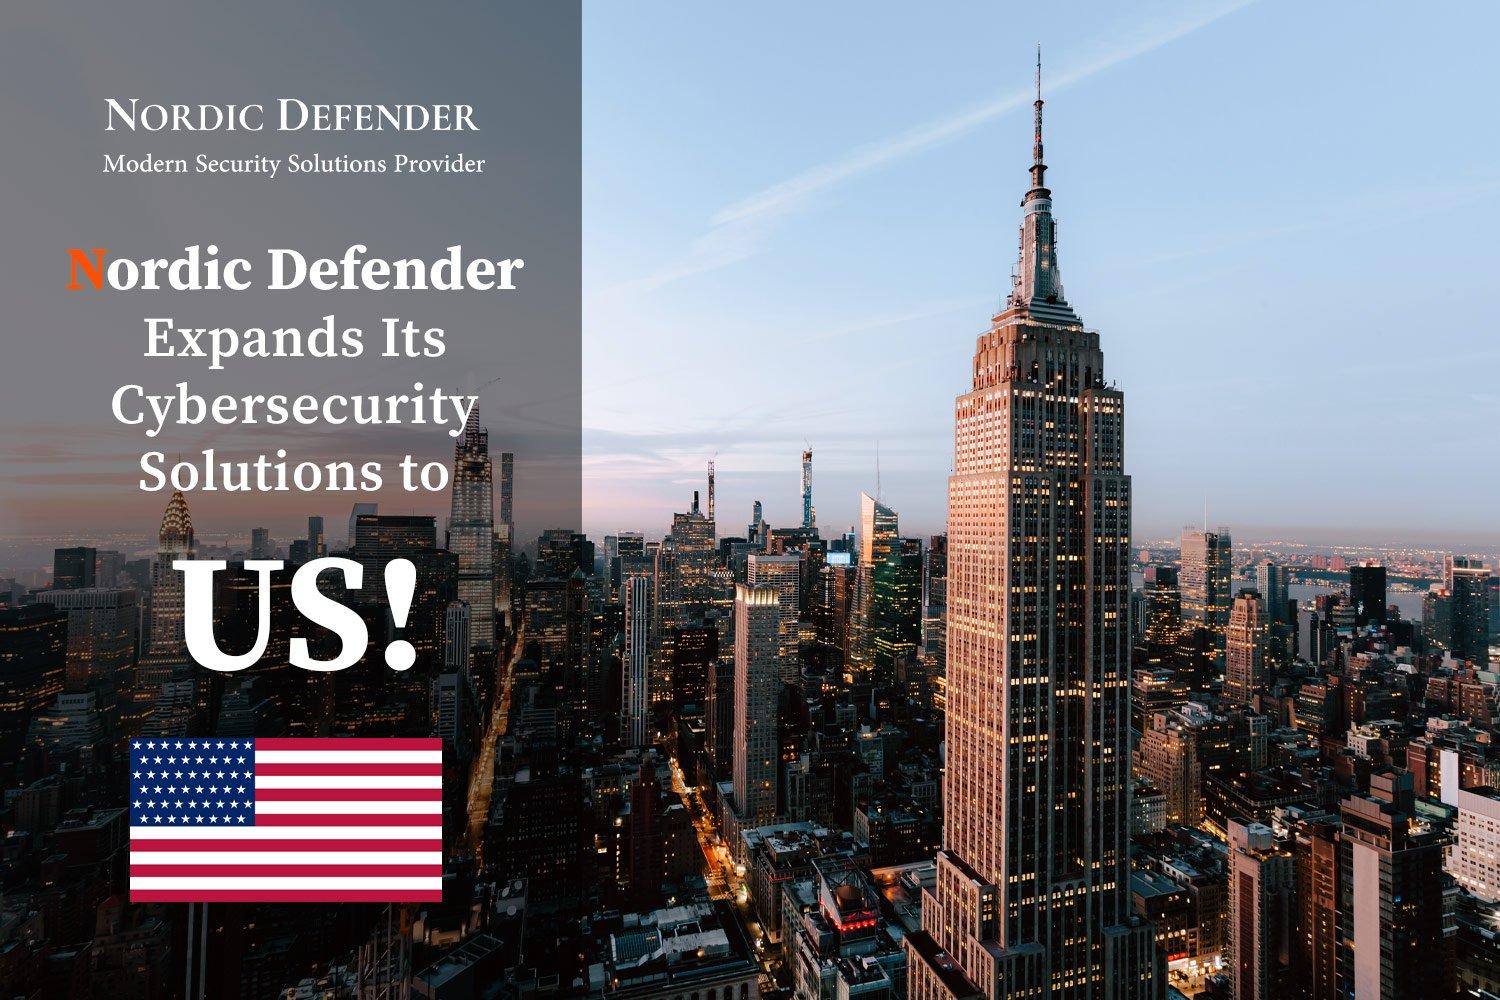 NordicDefender Expands to USA